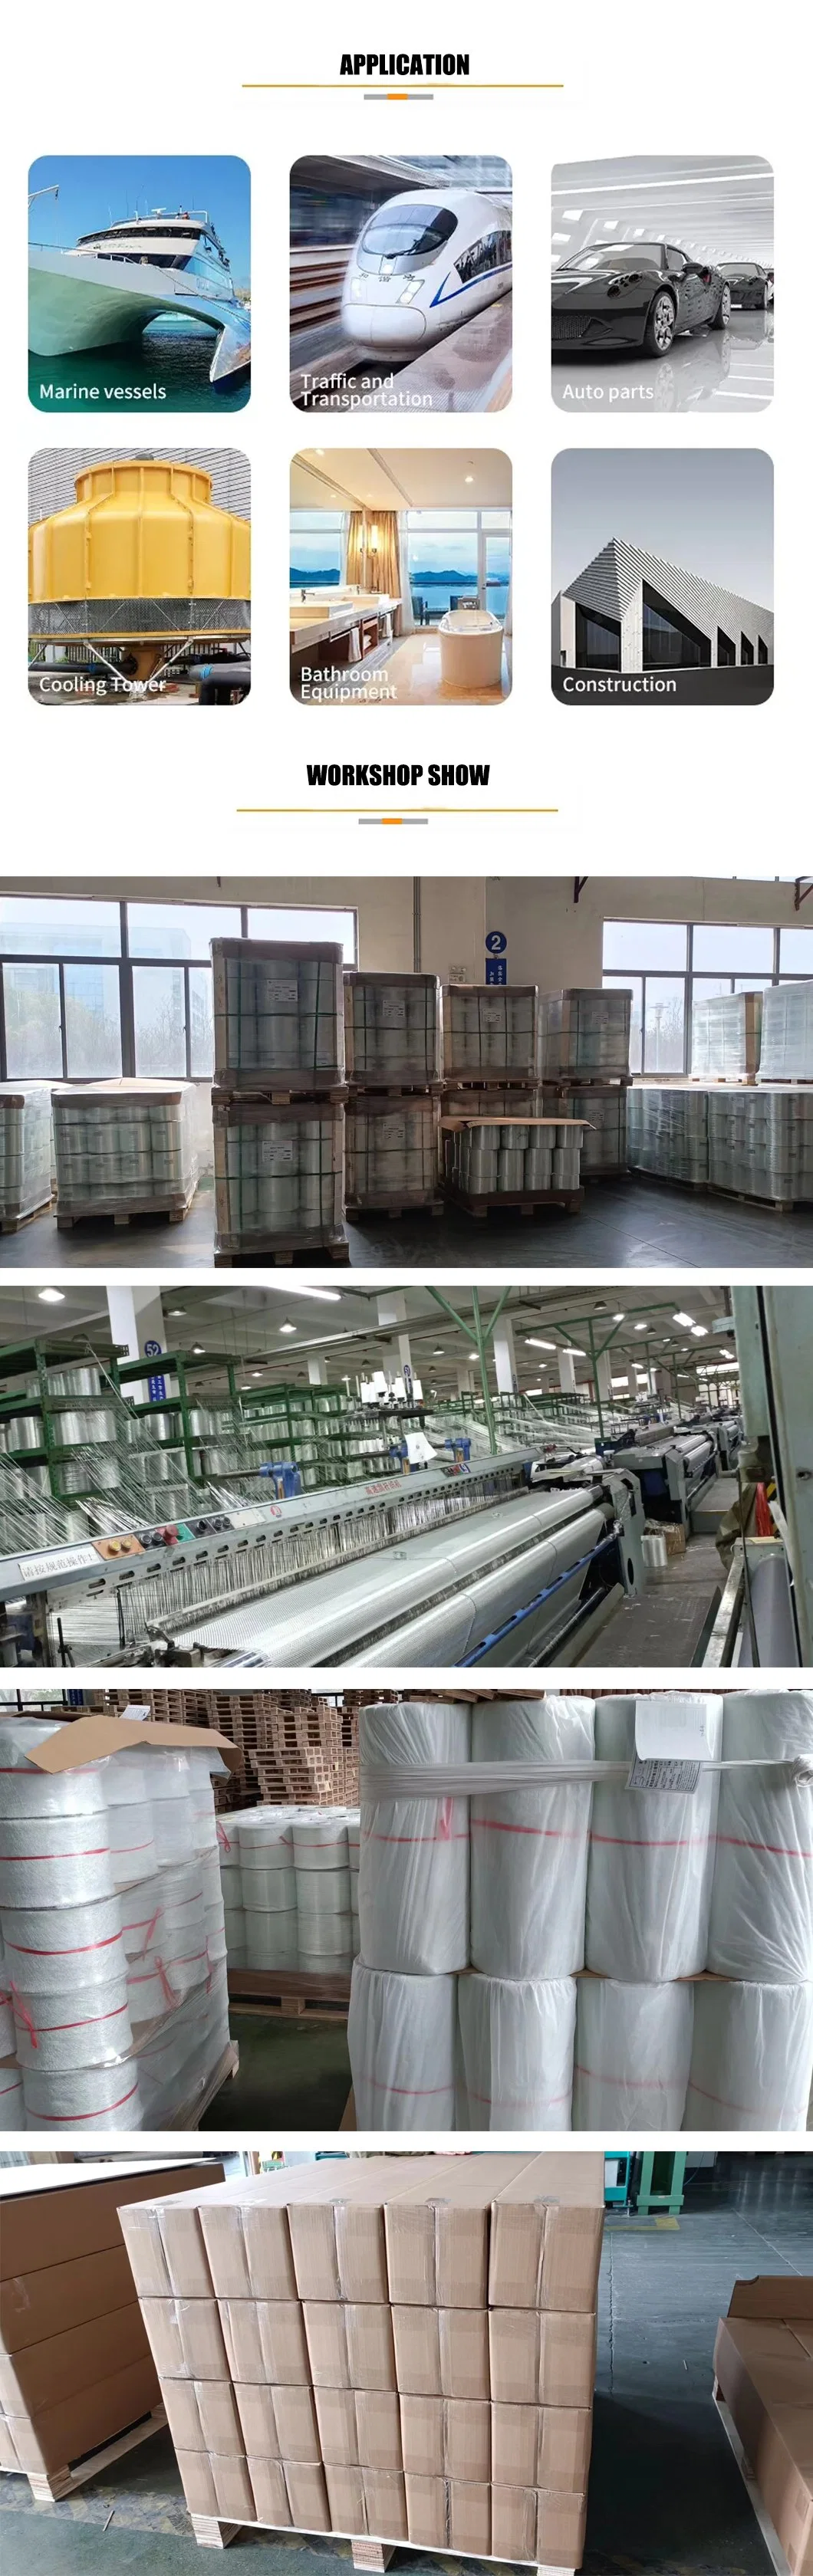 E-Glass Powder Emulsion Chopped Strand Mats 225g 300g, 450g, 600g, 900g Fiberglass Mat Pad for Continuous Plate Laminating, Cooling Tower, Boat, Pipe, Truck